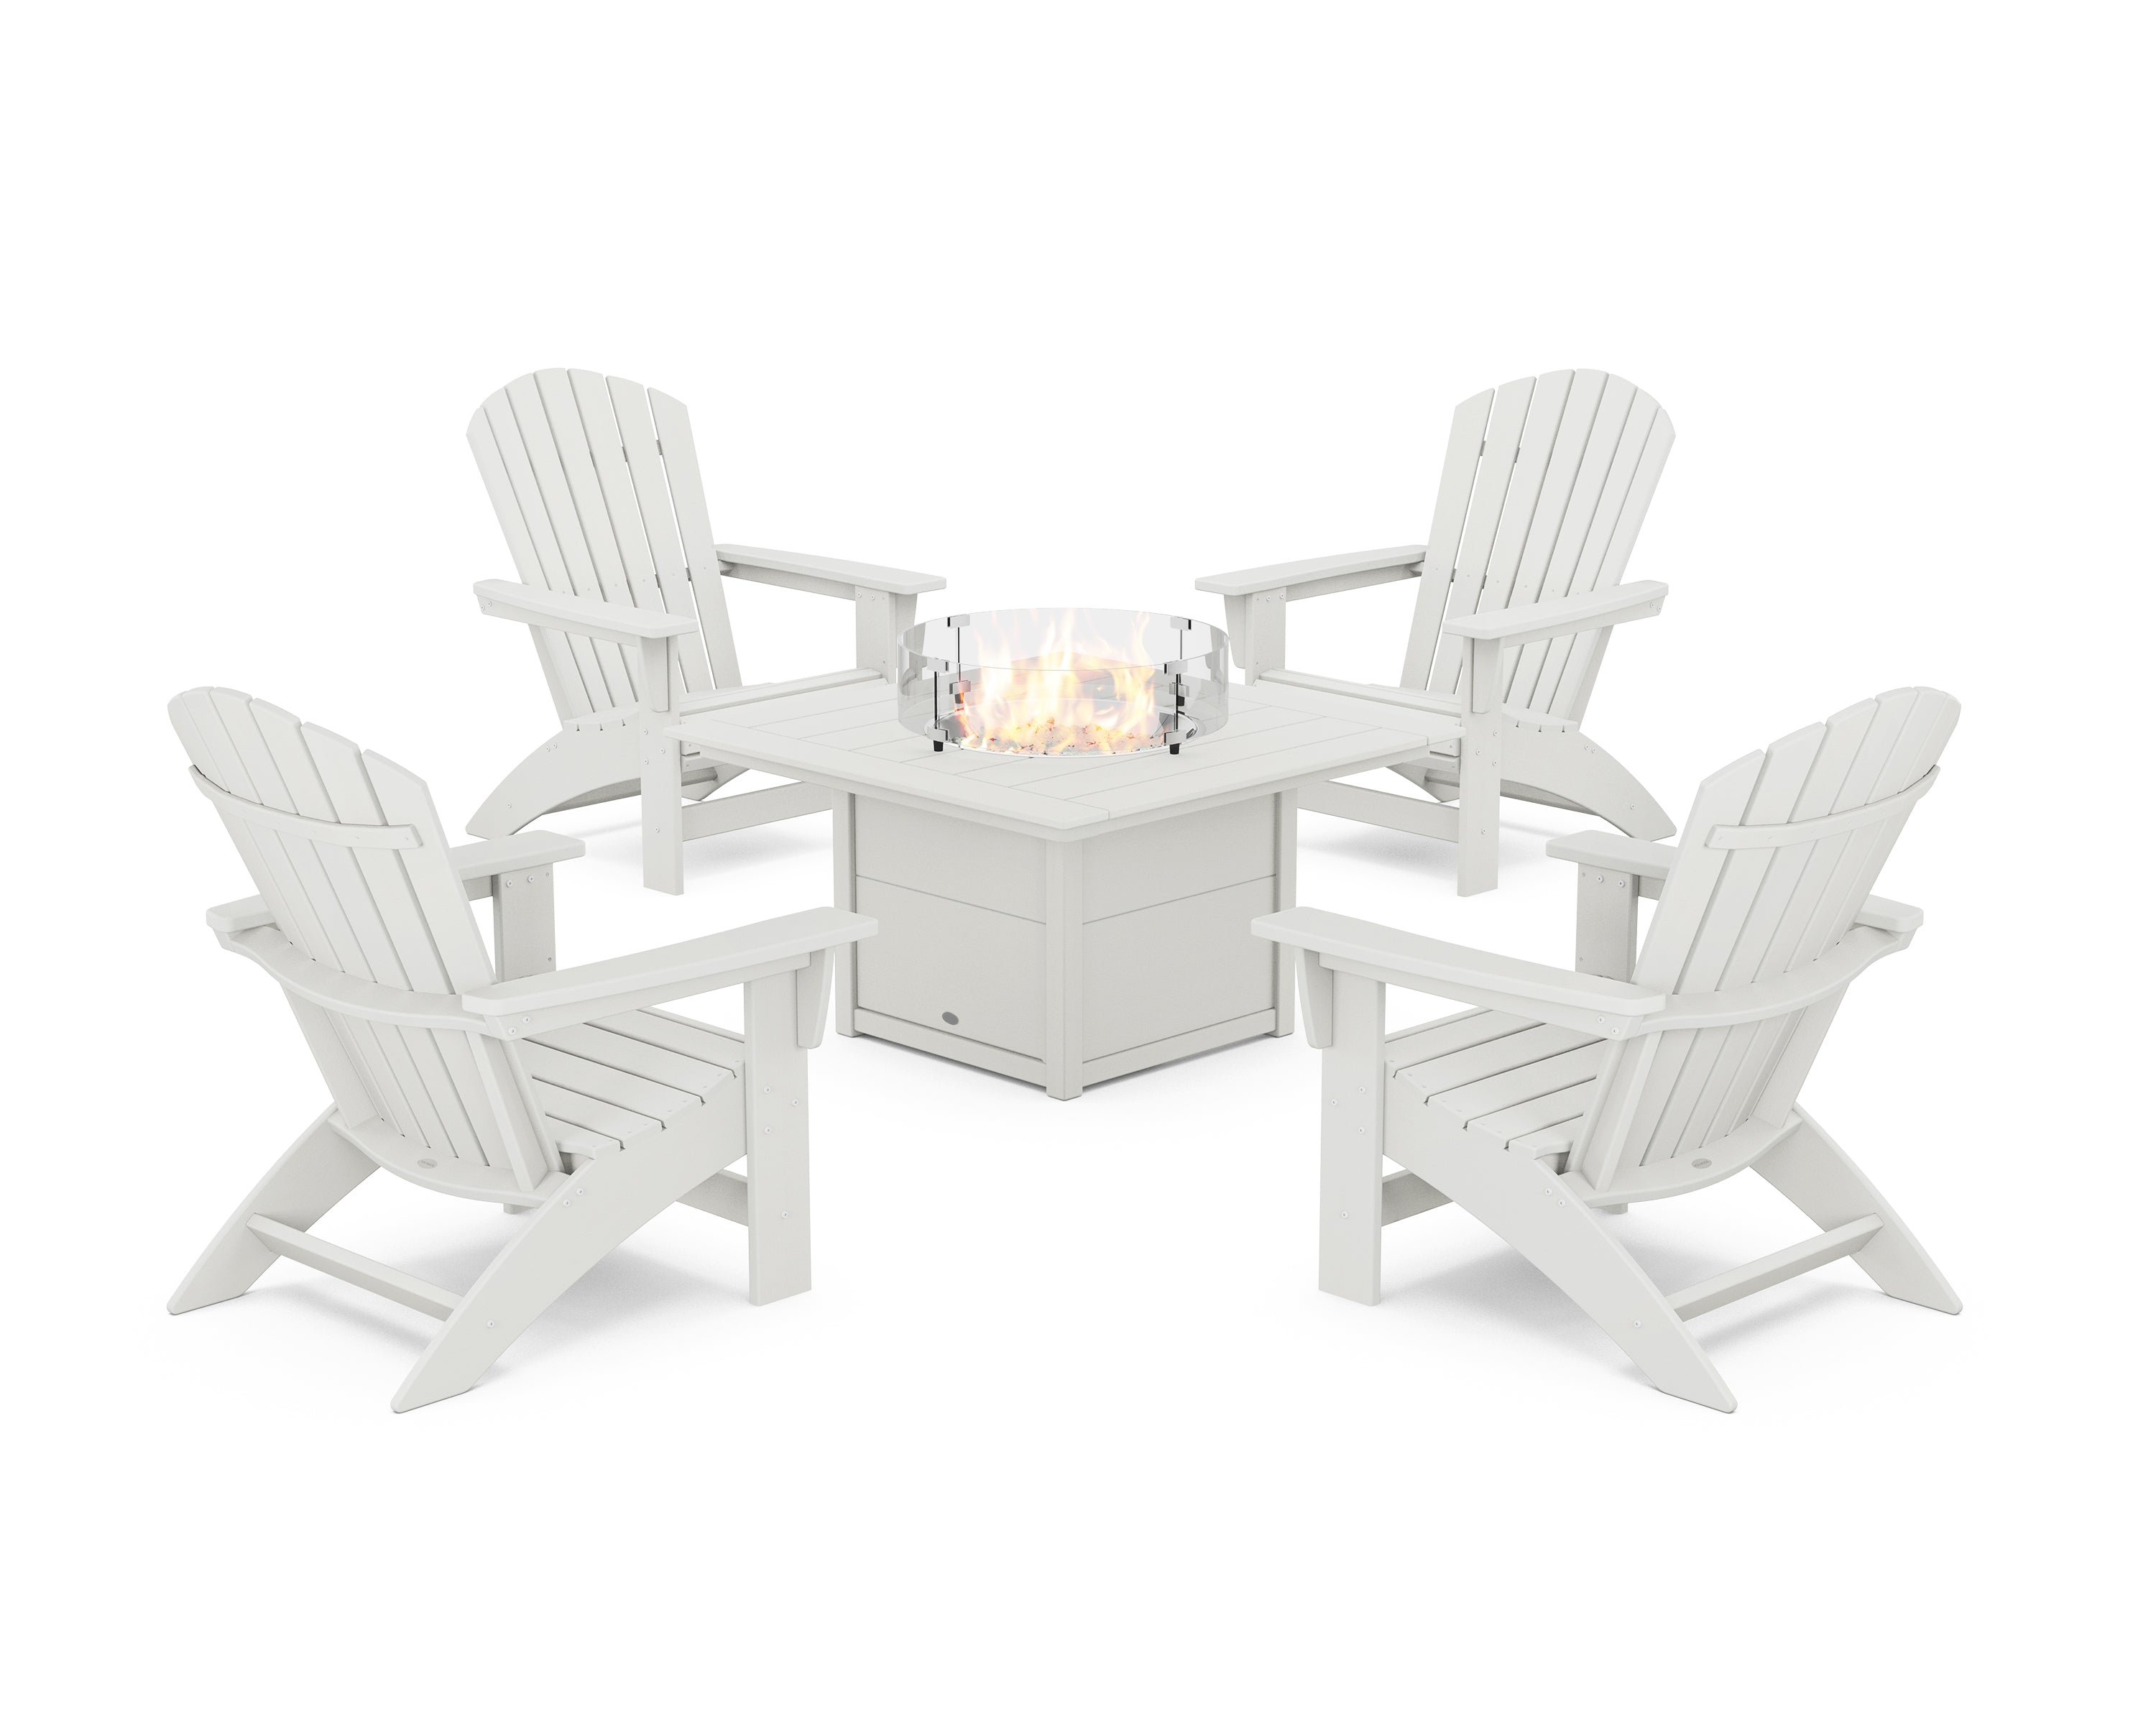 POLYWOOD® 5-Piece Nautical Grand Adirondack Conversation Set with Fire Pit Table in Vintage White